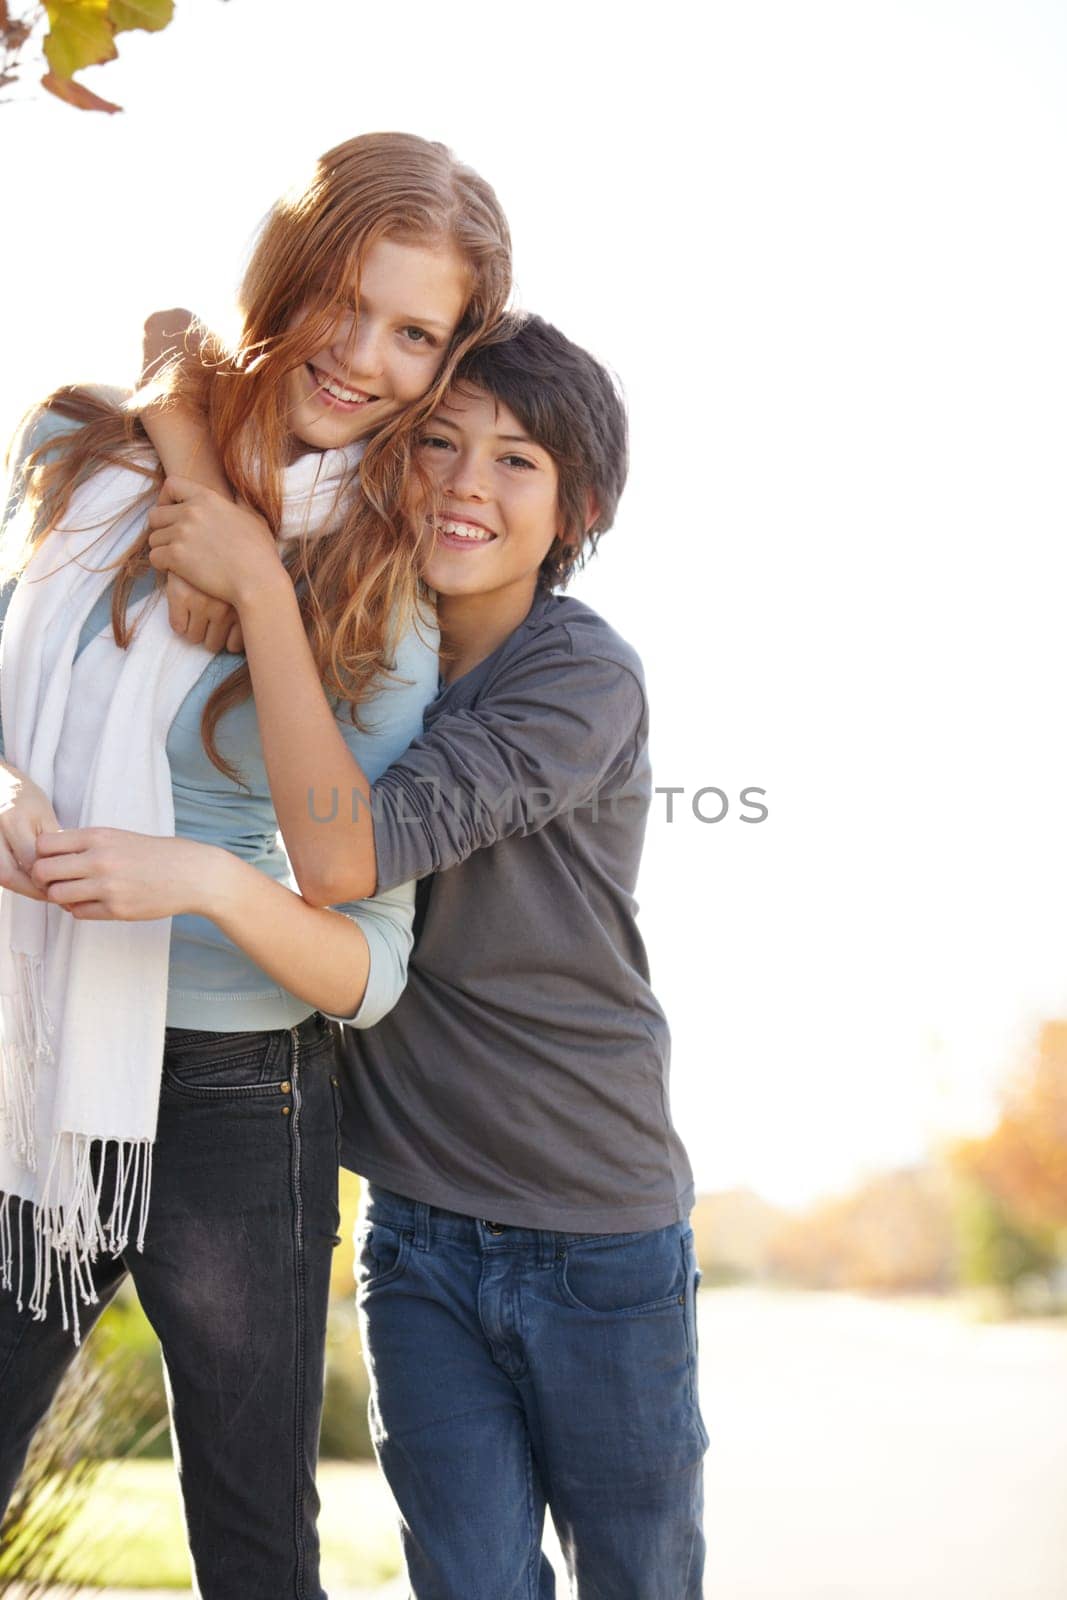 Love, portrait of brother with sister and hug outdoors for support with a lens flare with smile. Care or bonding time, family and happy people hugging outside together for health wellness in nature by YuriArcurs